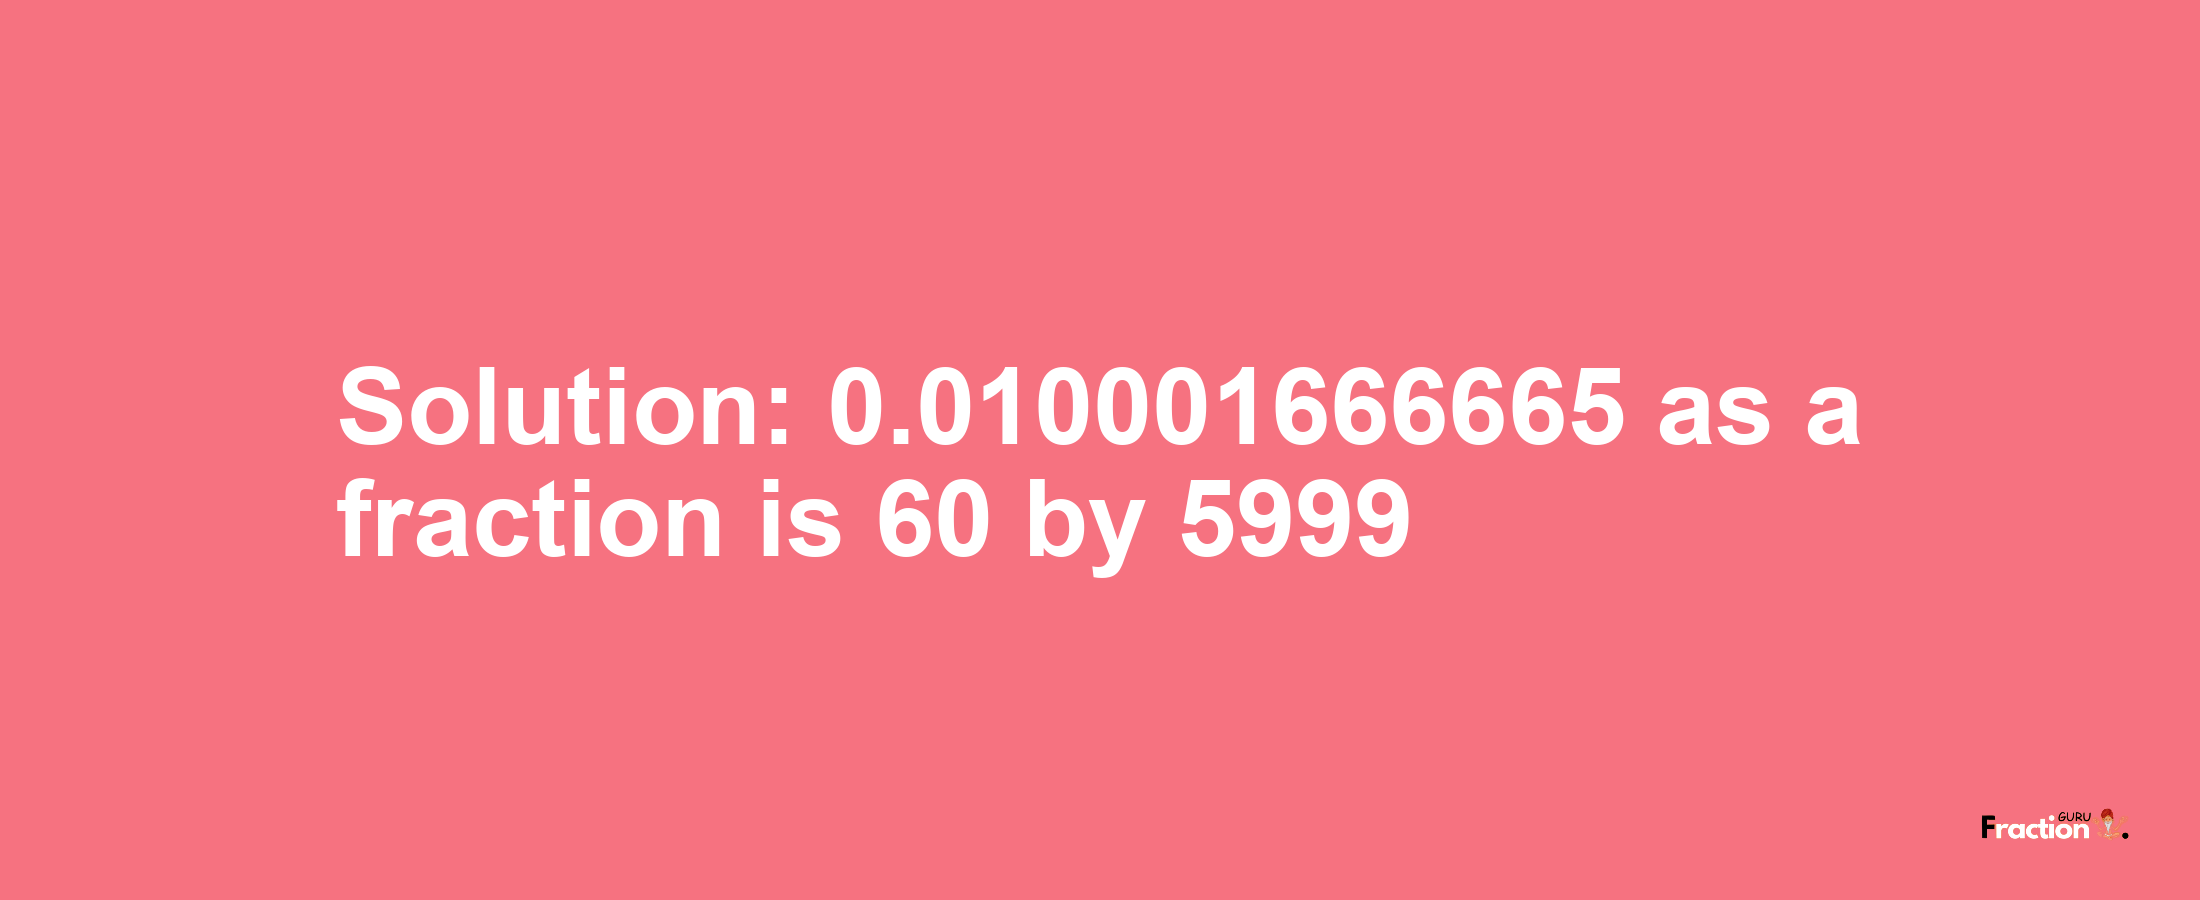 Solution:0.010001666665 as a fraction is 60/5999